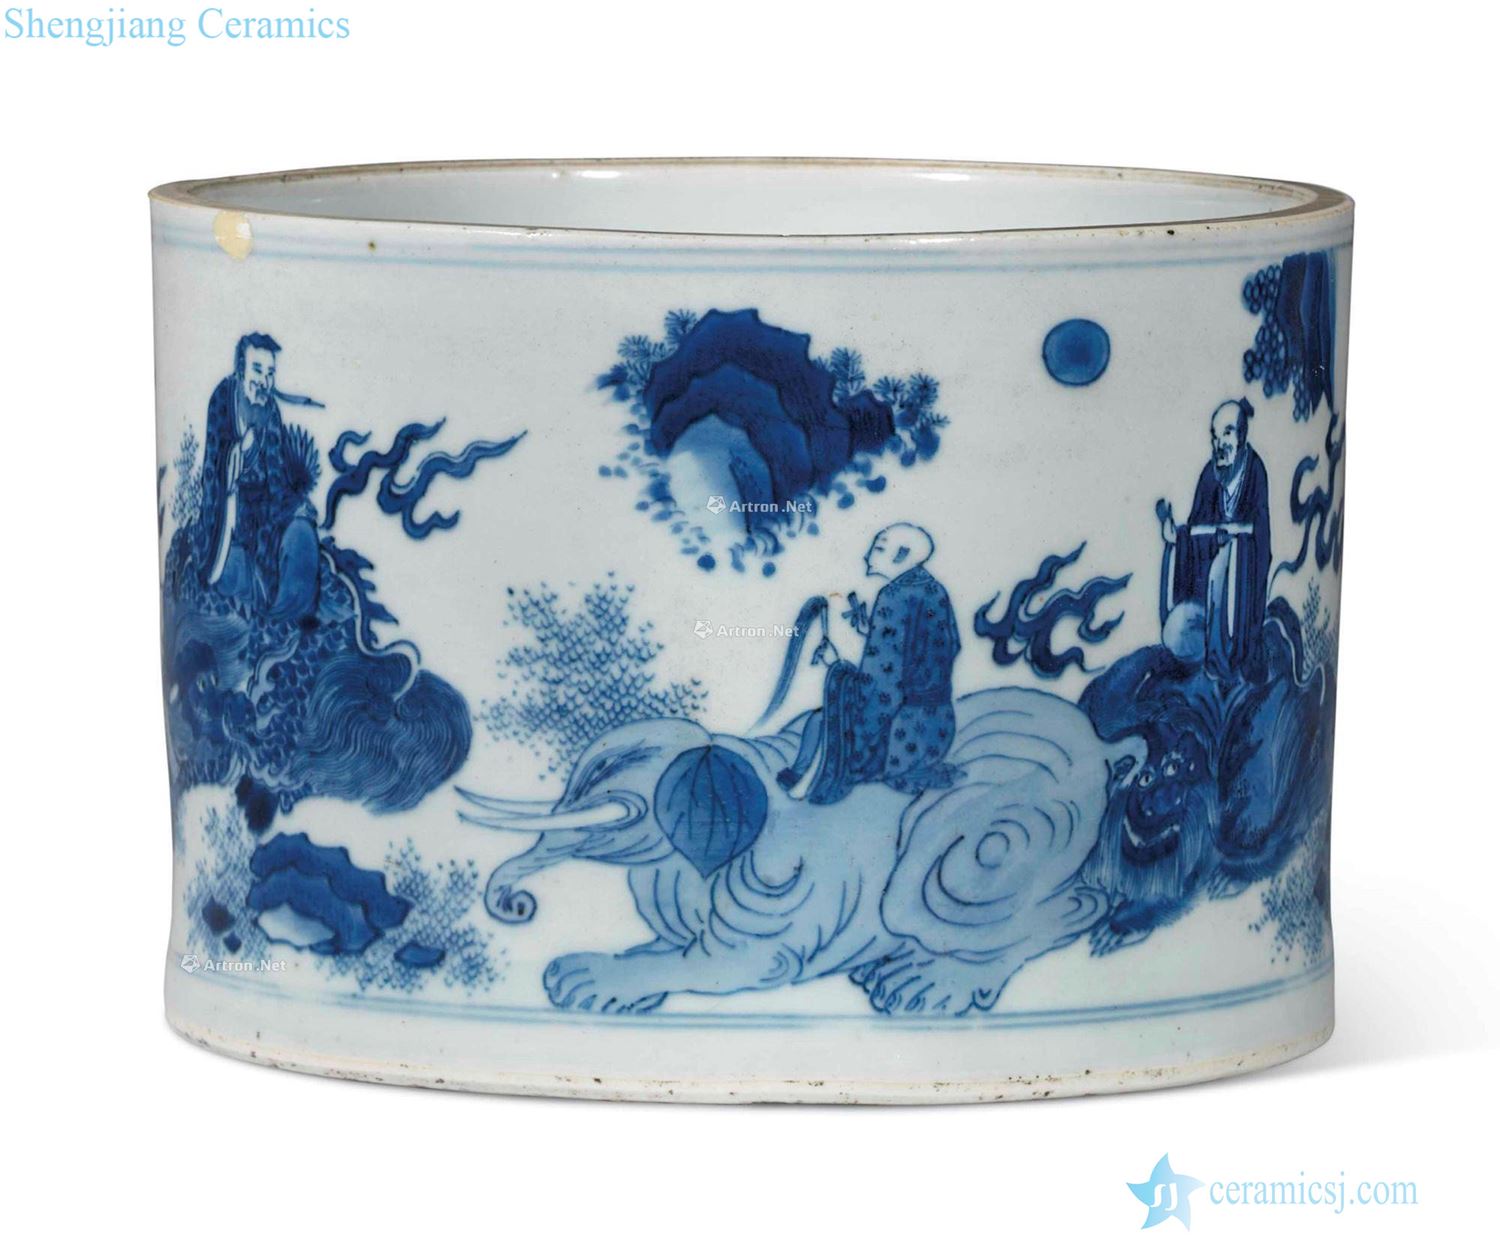 The late Ming dynasty Blue and white landscape character figure pen container